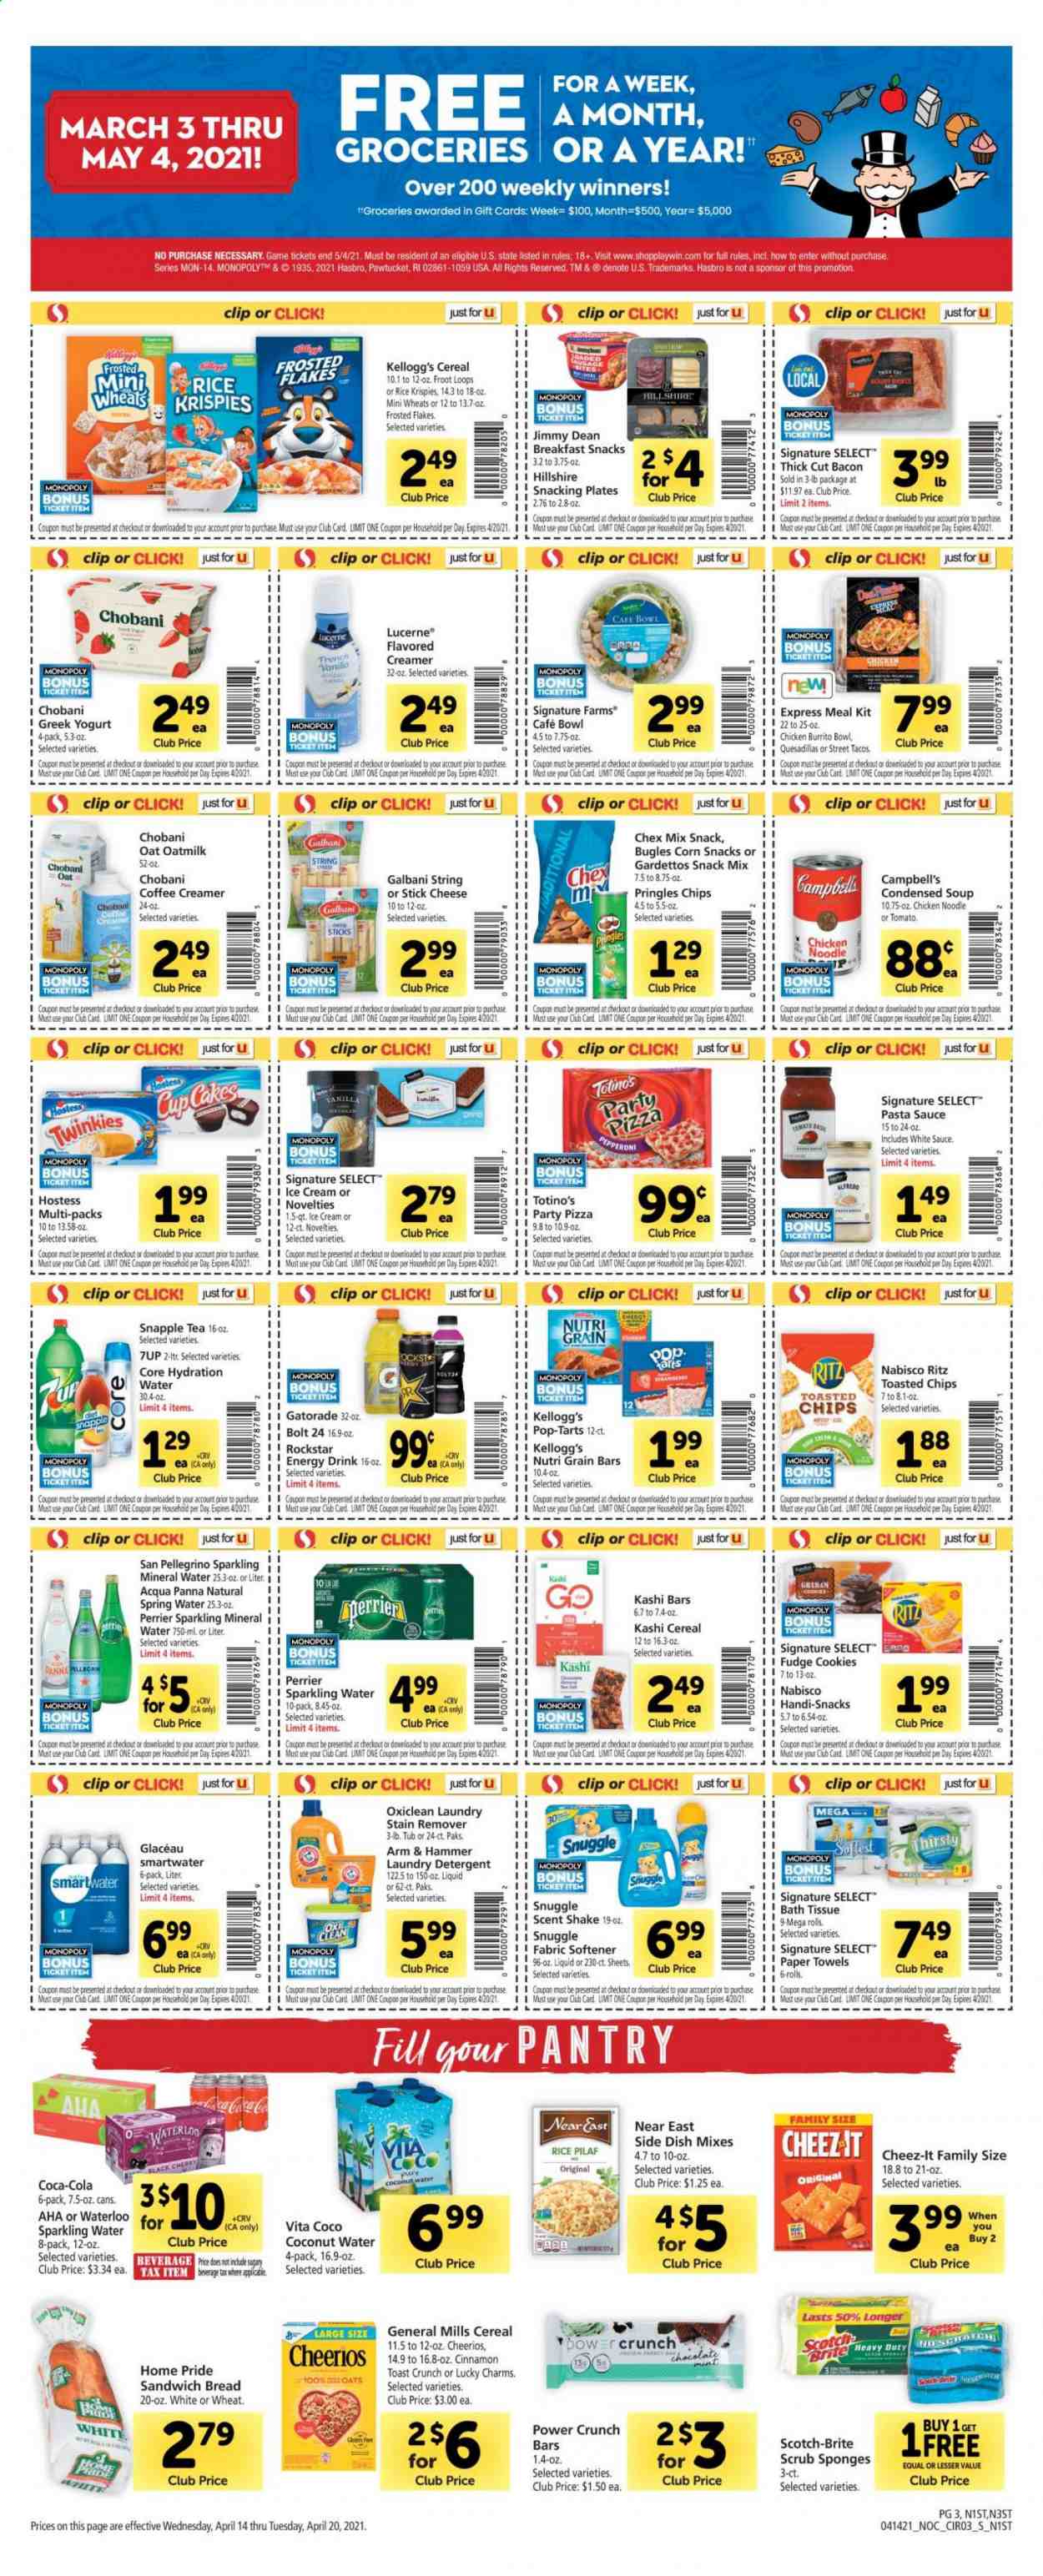 thumbnail - Safeway Flyer - 04/14/2021 - 04/20/2021 - Sales products - bread, pie, tacos, corn, pizza, pasta sauce, condensed soup, soup, sauce, noodles, instant soup, Jimmy Dean, bacon, Galbani, greek yoghurt, yoghurt, Chobani, shake, oat milk, creamer, coffee and tea creamer, cheese sticks, cookies, fudge, snack, Kellogg's, Pop-Tarts, RITZ, Pringles, chips, Cheez-It, Chex Mix, ARM & HAMMER, cereals, Cheerios, Rice Krispies, Frosted Flakes, Nutri-Grain, cinnamon, Coca-Cola, energy drink, coconut water, 7UP, Snapple, Perrier, Rockstar, Gatorade, mineral water, spring water, sparkling water, tea, bath tissue, kitchen towels, paper towels, detergent, stain remover, OxiClean, Snuggle, fabric softener, laundry detergent, sponge, bowl. Page 3.